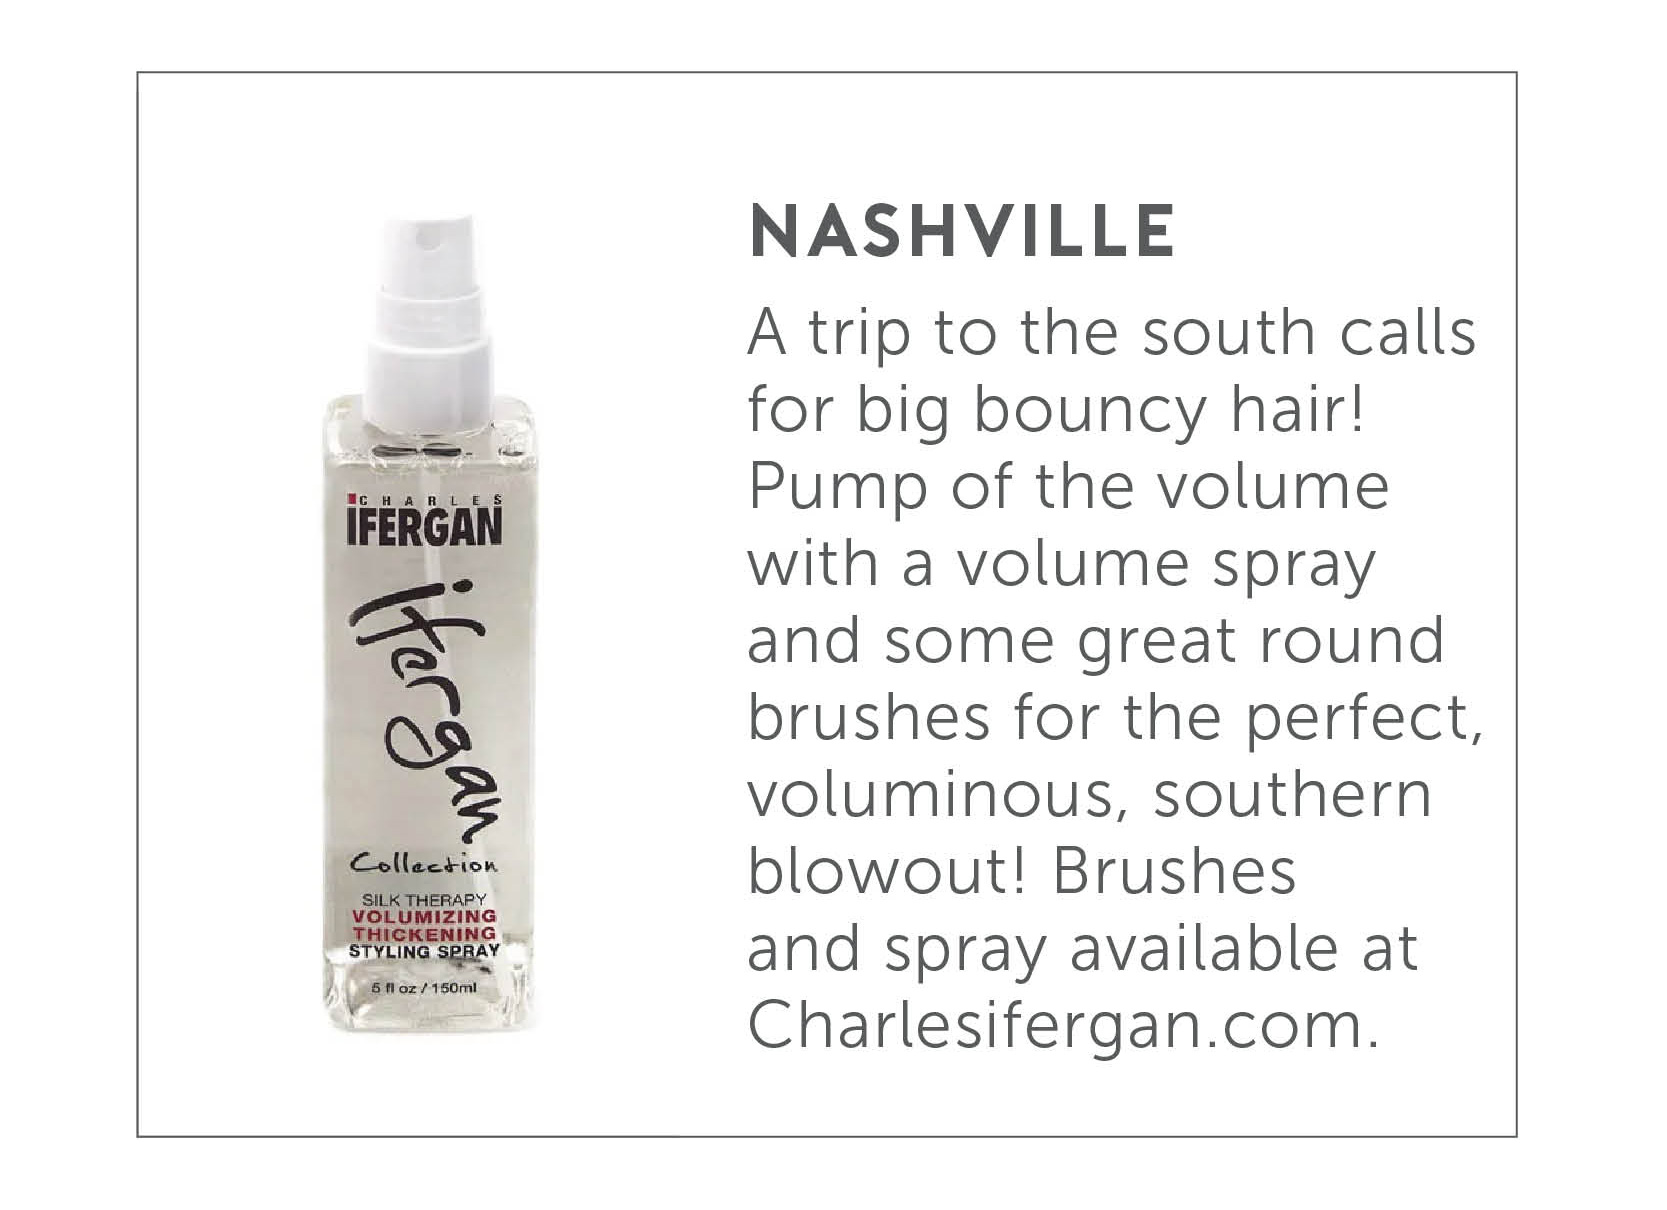 Nashville - A trip to the south calls for big bouncy hair! Pump up the volume with a volume spray and some great round brushes for the perfect, voluminous, southern blowout! Brushes and spray available at charlesifergan.com